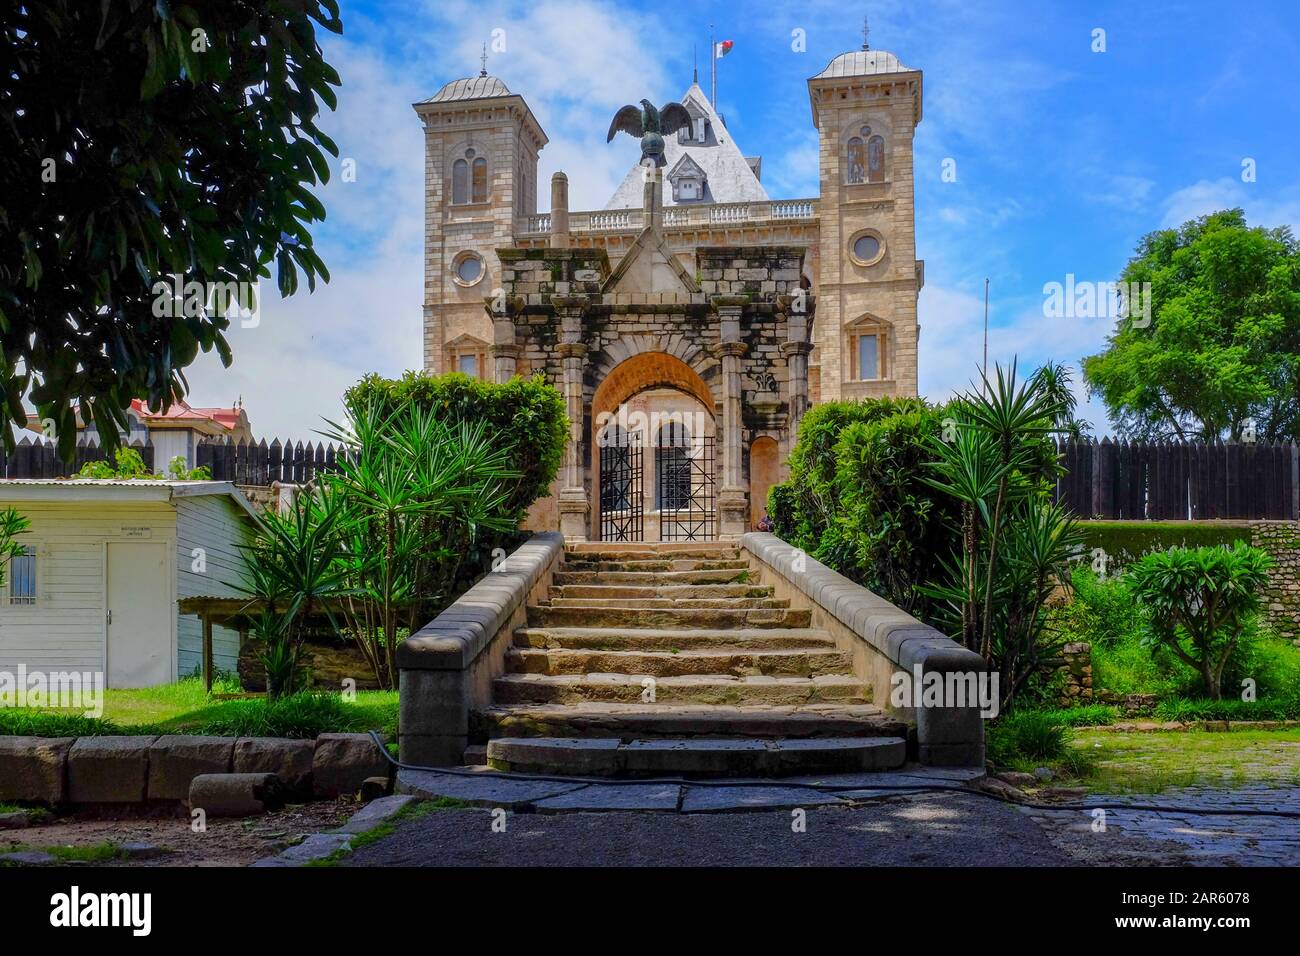 The northern gateway to the Rova of Antananarivo, also known as the Queen's palace, a royal complex in Madagascar. Stock Photo